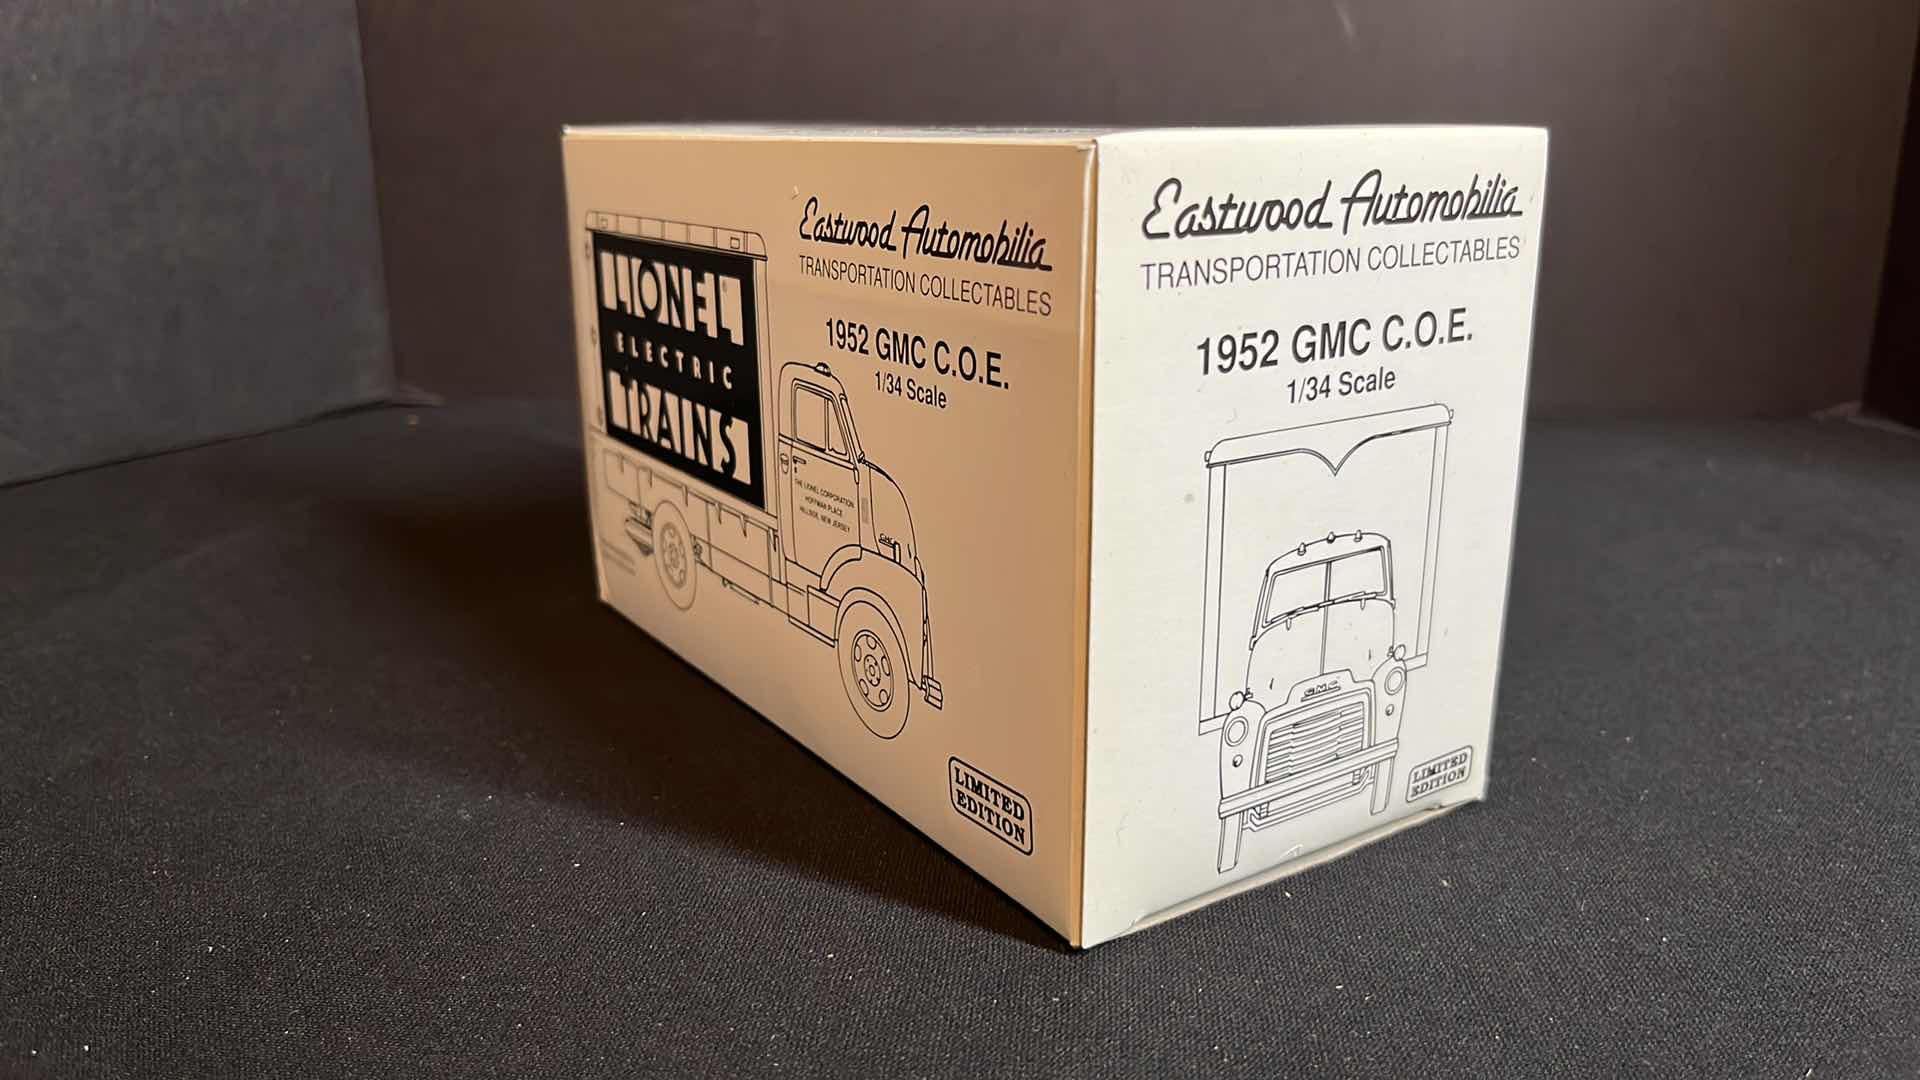 Photo 7 of NIB FIRST GEAR INC EASTWOOD AUTOMOBILIA TRANSPORTATION COLLECTABLES LIONEL ELECTRIC TRAINS DIE-CAST METAL 1/34 SCALE 1952 GMC C.O.E., 1992 (STOCK #19-0108)